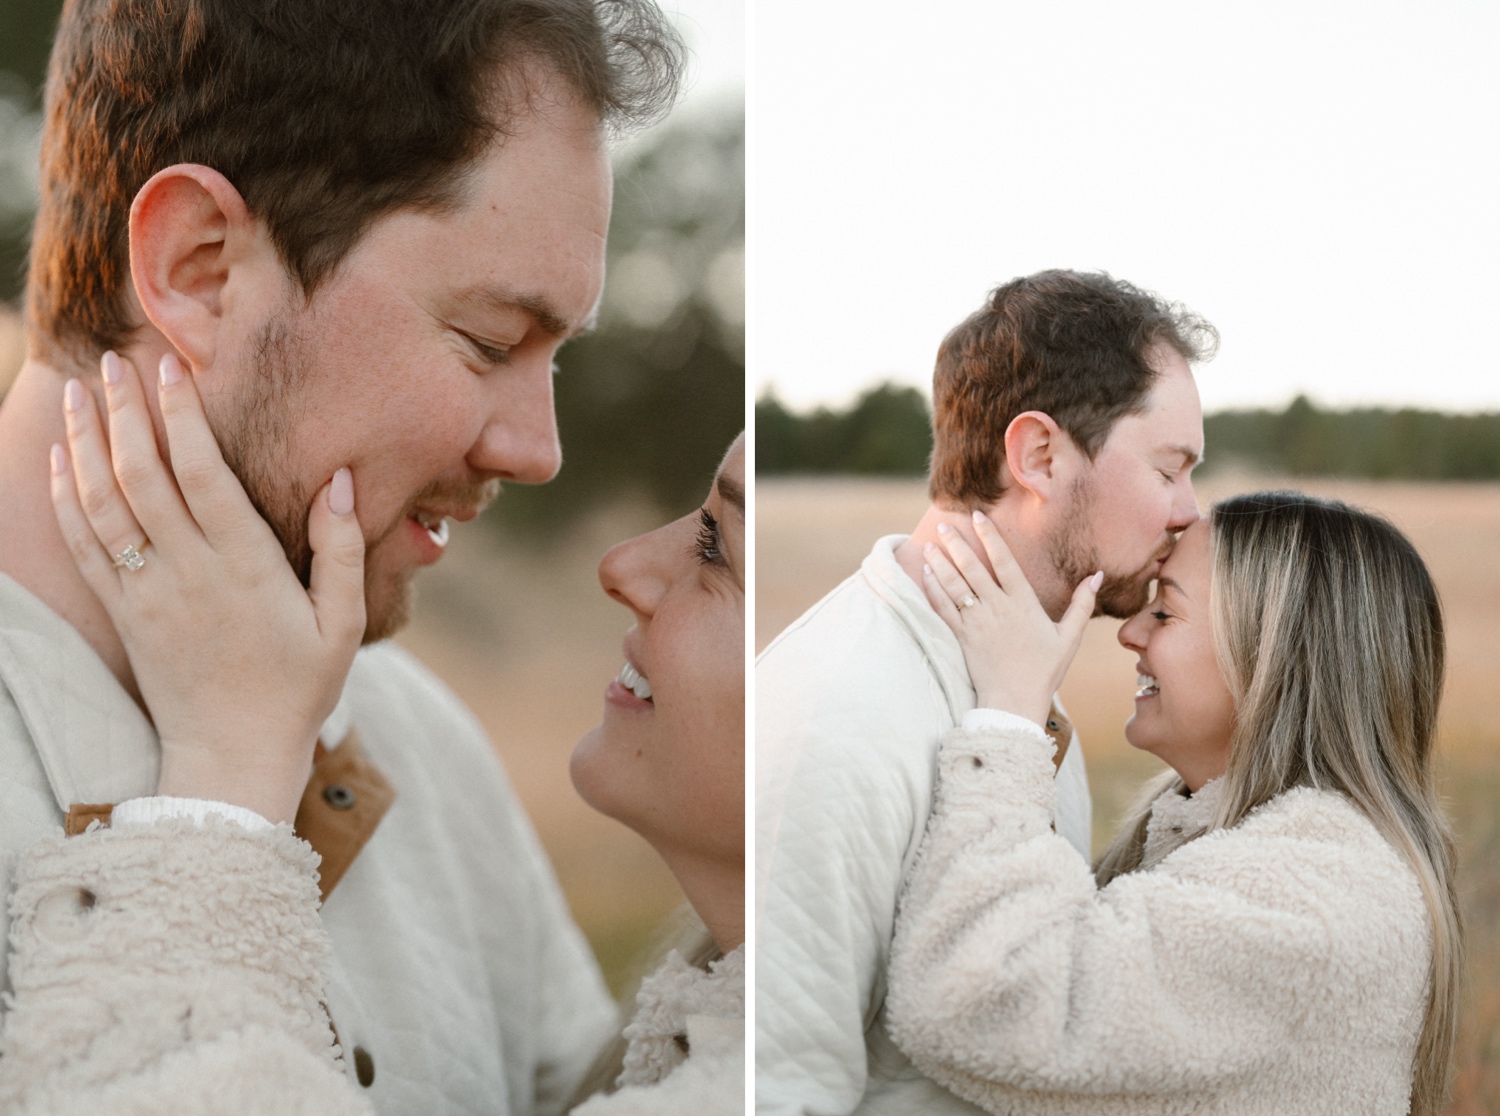 A collage of two photos of an engaged couple embracing each other in Elk Meadow Park in Evergreen, Colorado for their Colorado engagement photos, taken by Colorado wedding photographer Ashley Joyce Photography.